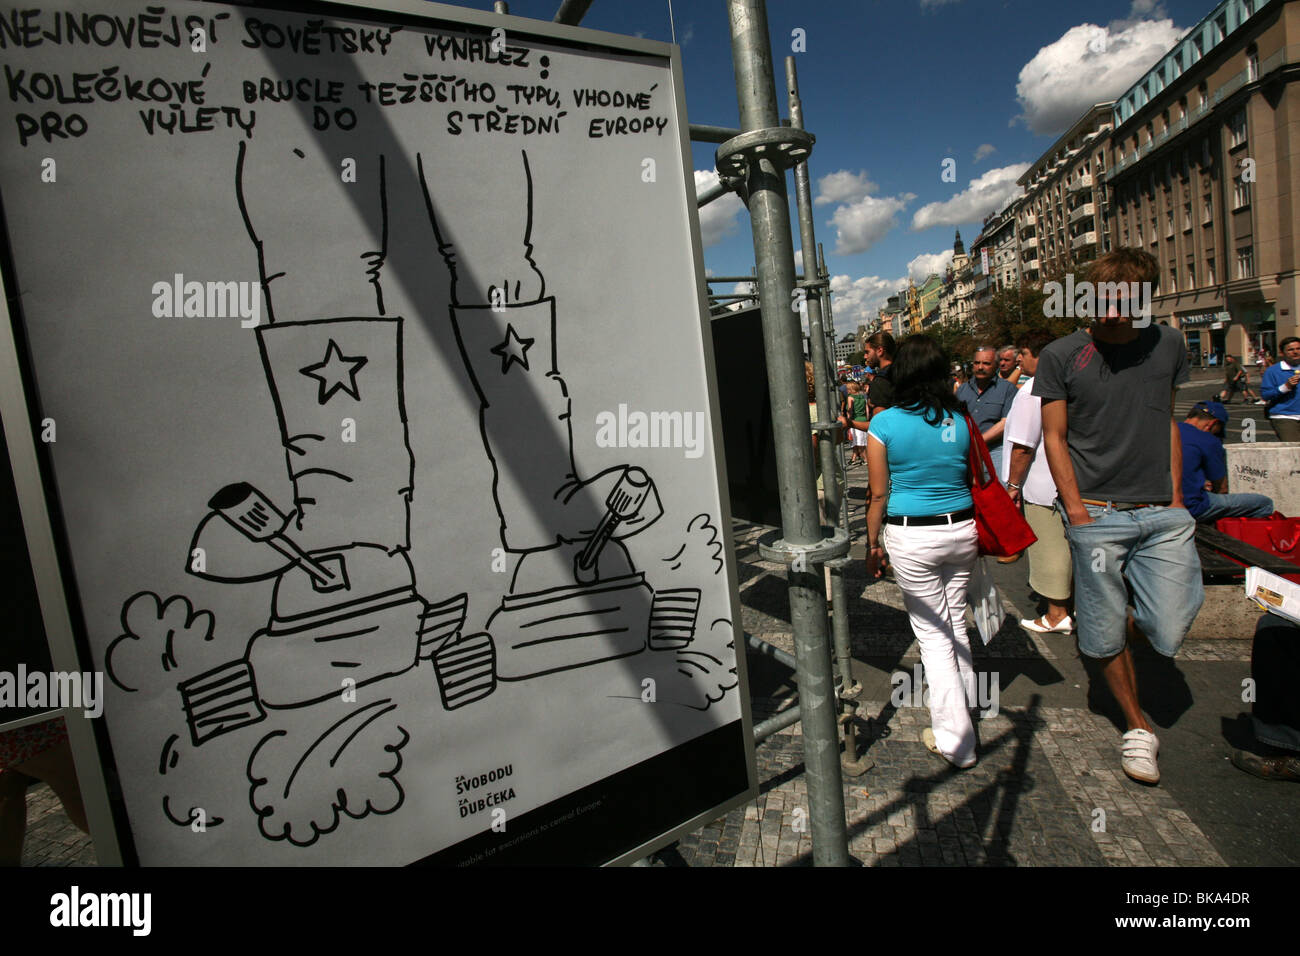 Open-air exhibition of political cartoon in Wenceslas Square in Prague, Czech Republic, on August 21, 2008. Stock Photo